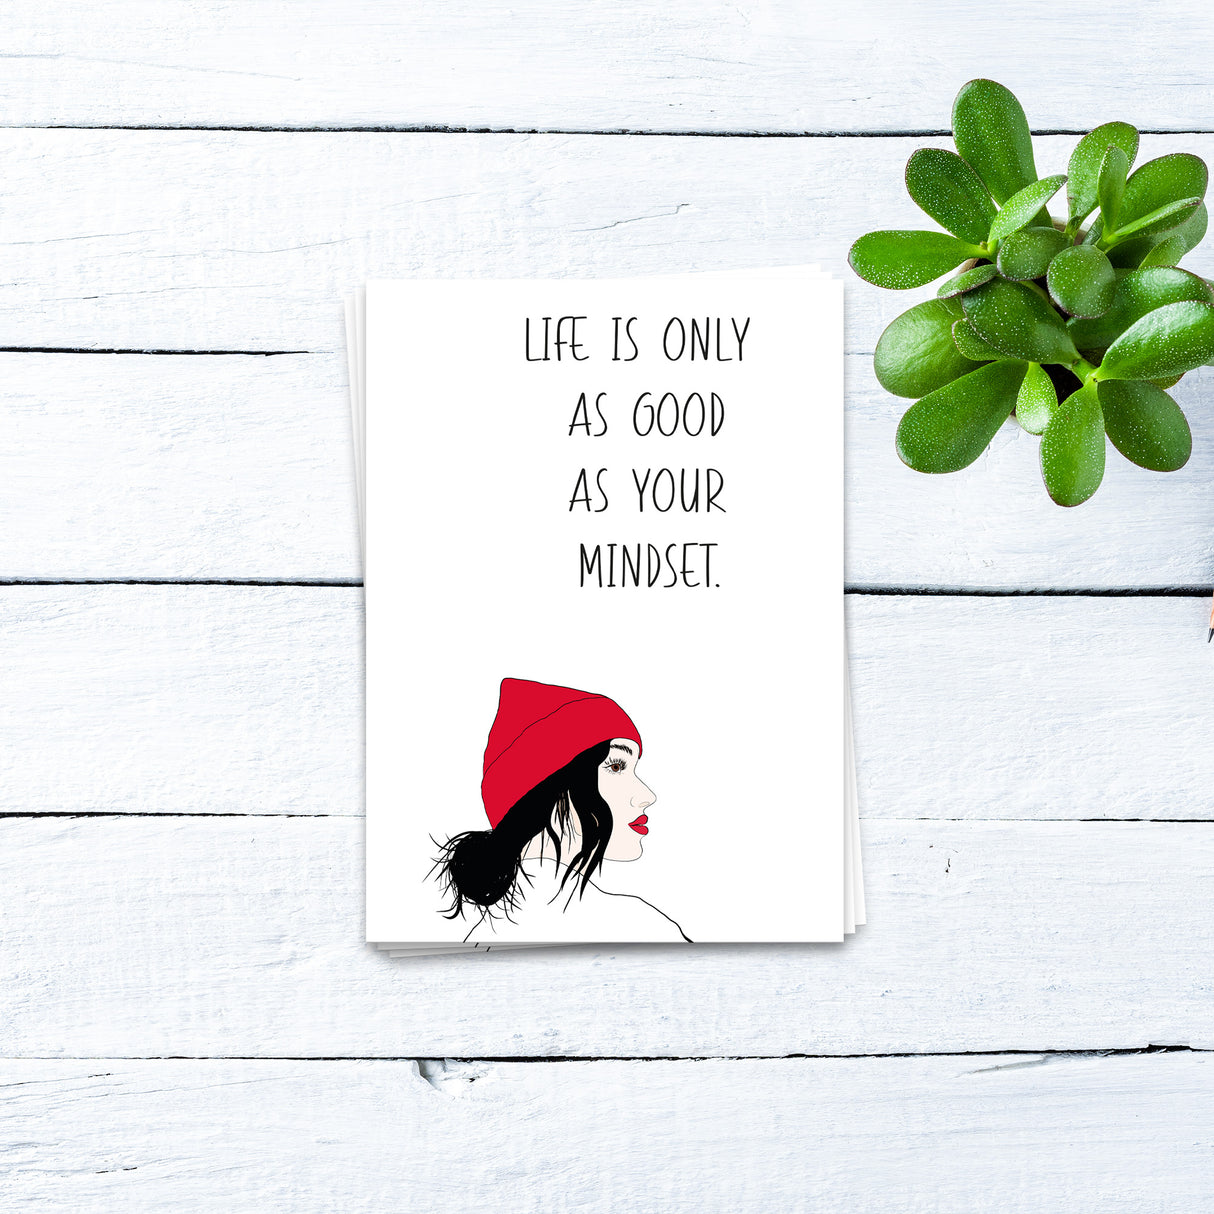 Life is only as good as your mindset - Postkarte